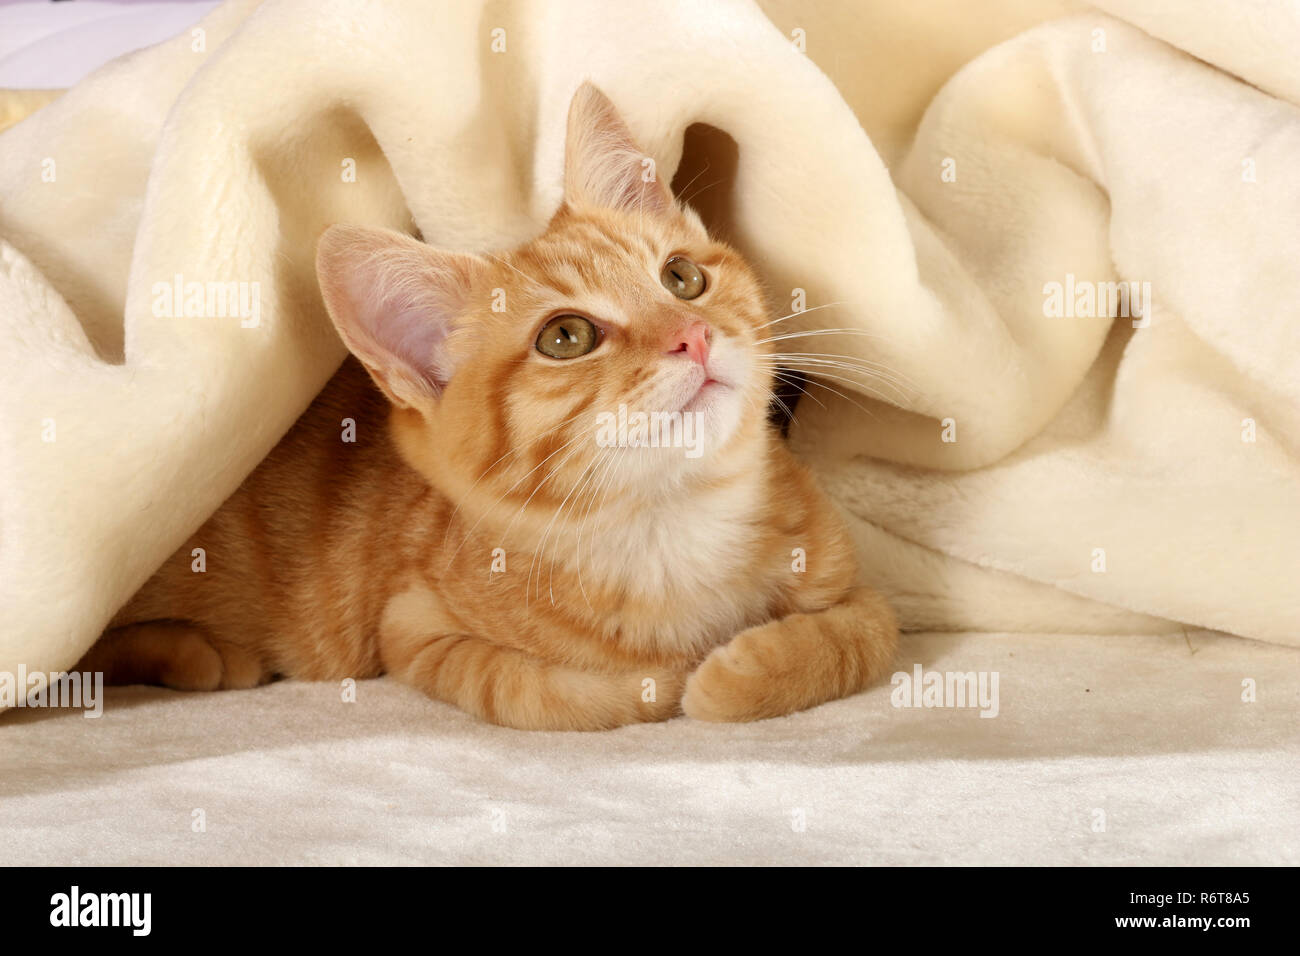 young ginger cat, 3 month old, lying under a blanket Stock Photo